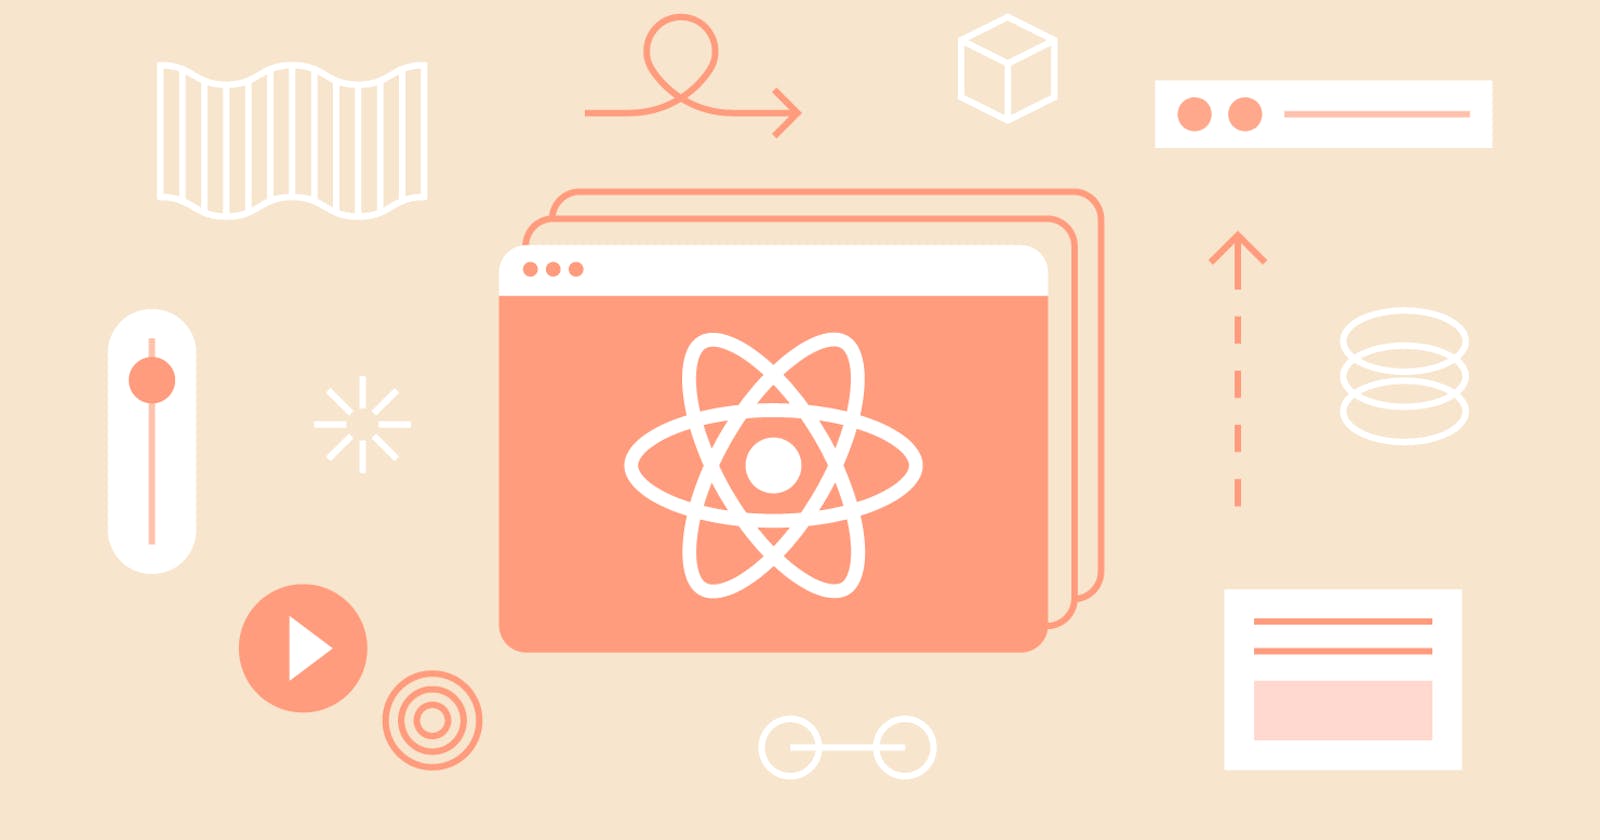 React Design Patterns: How to Build Scalable and Maintainable Applications"